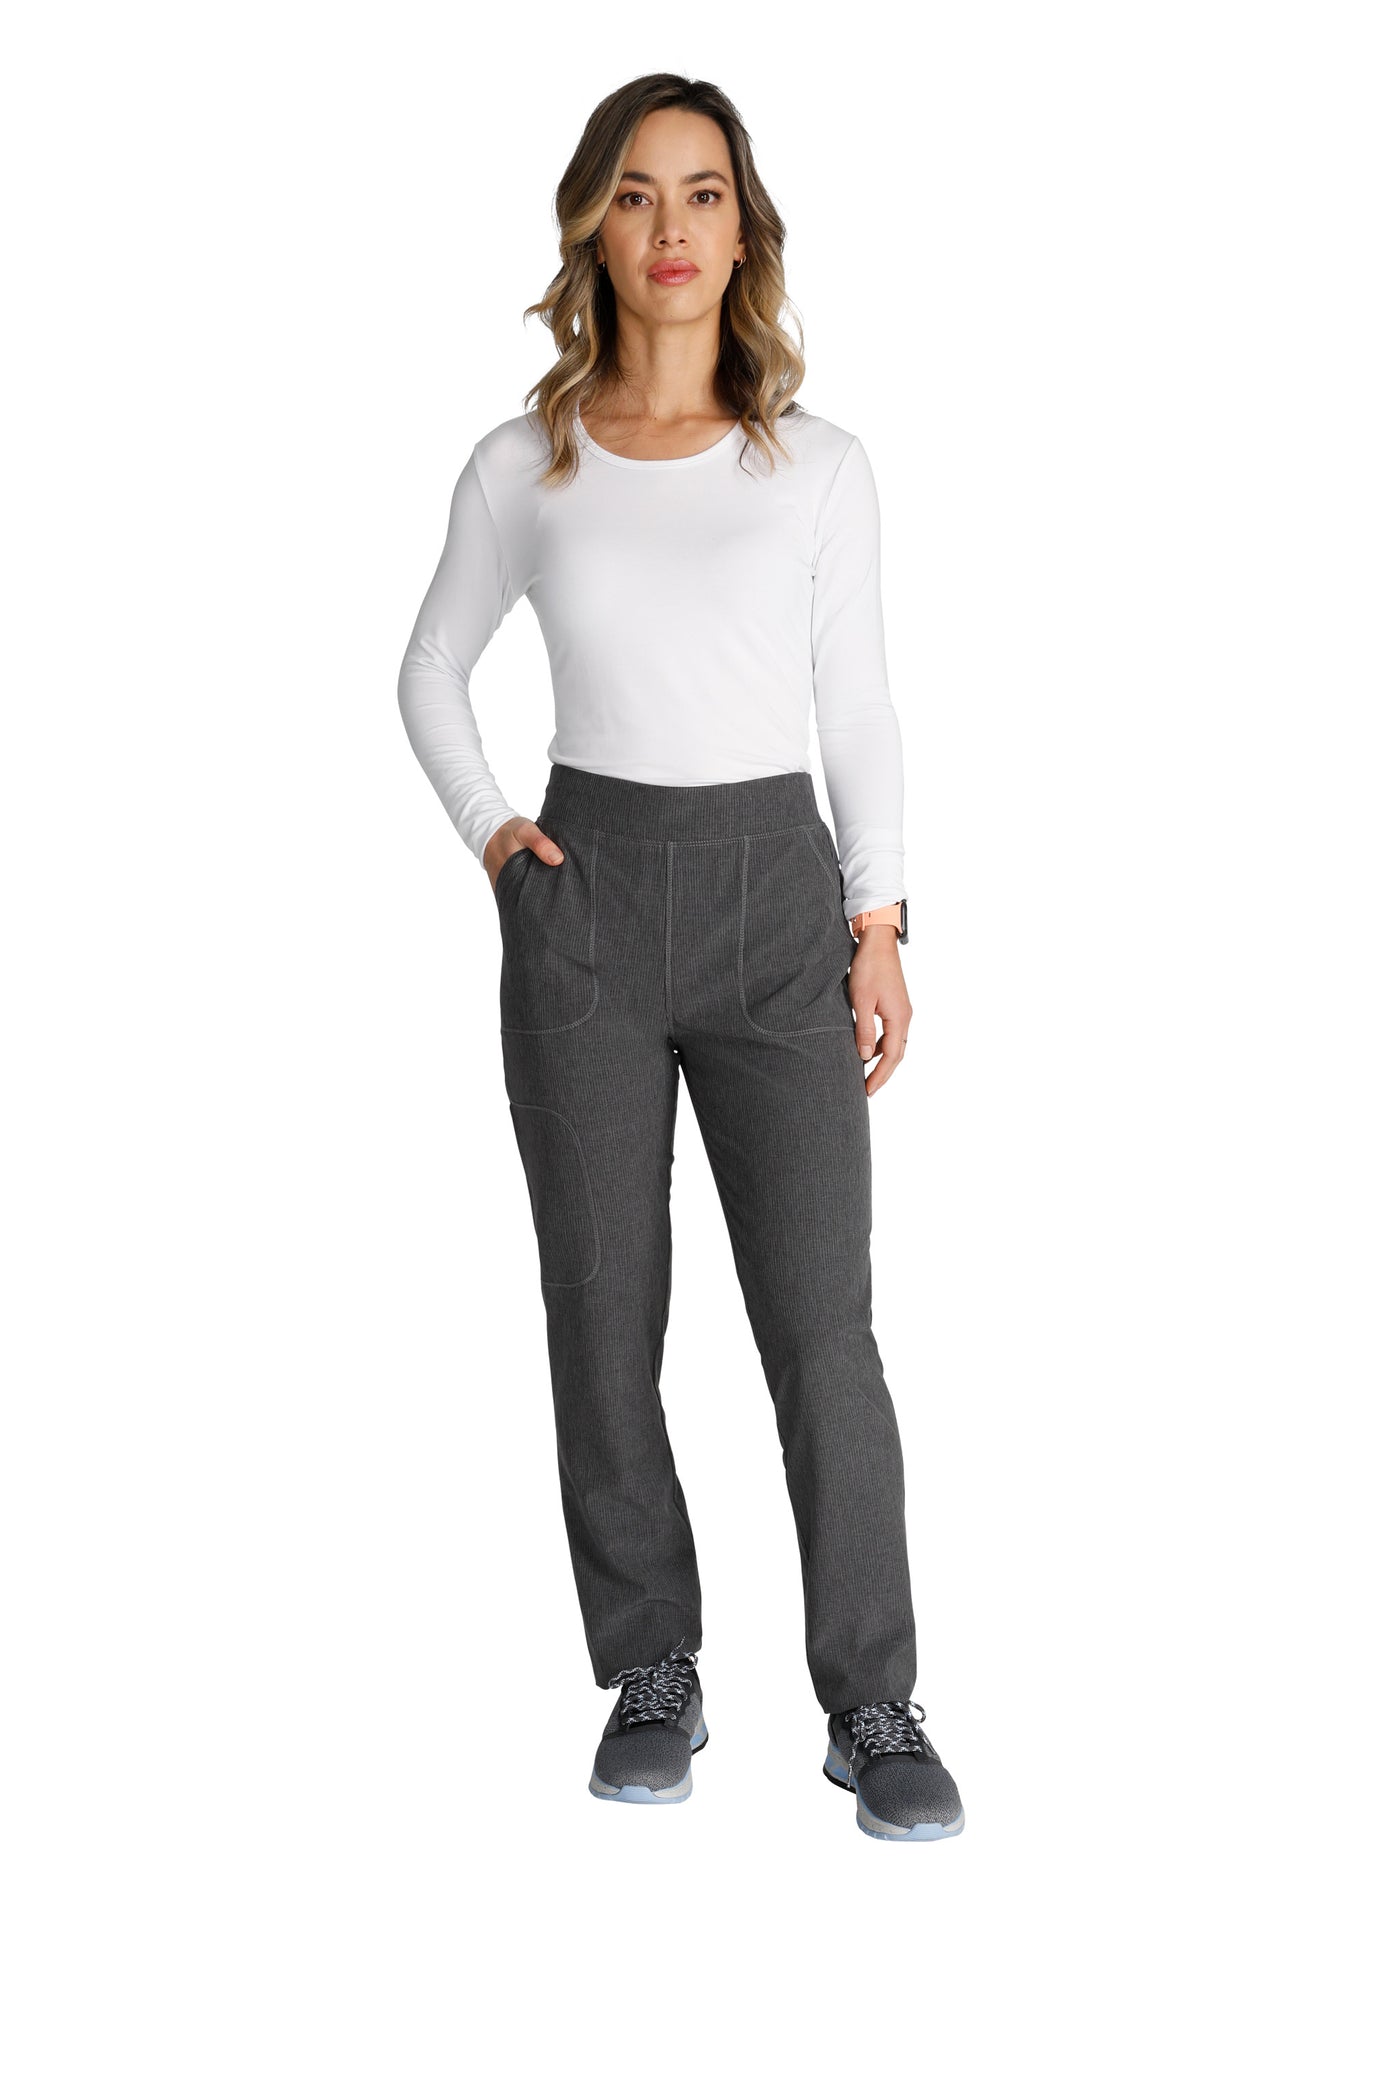 Heather Pewter - Cherokee Collection Mid Rise Pull On Cargo Pant